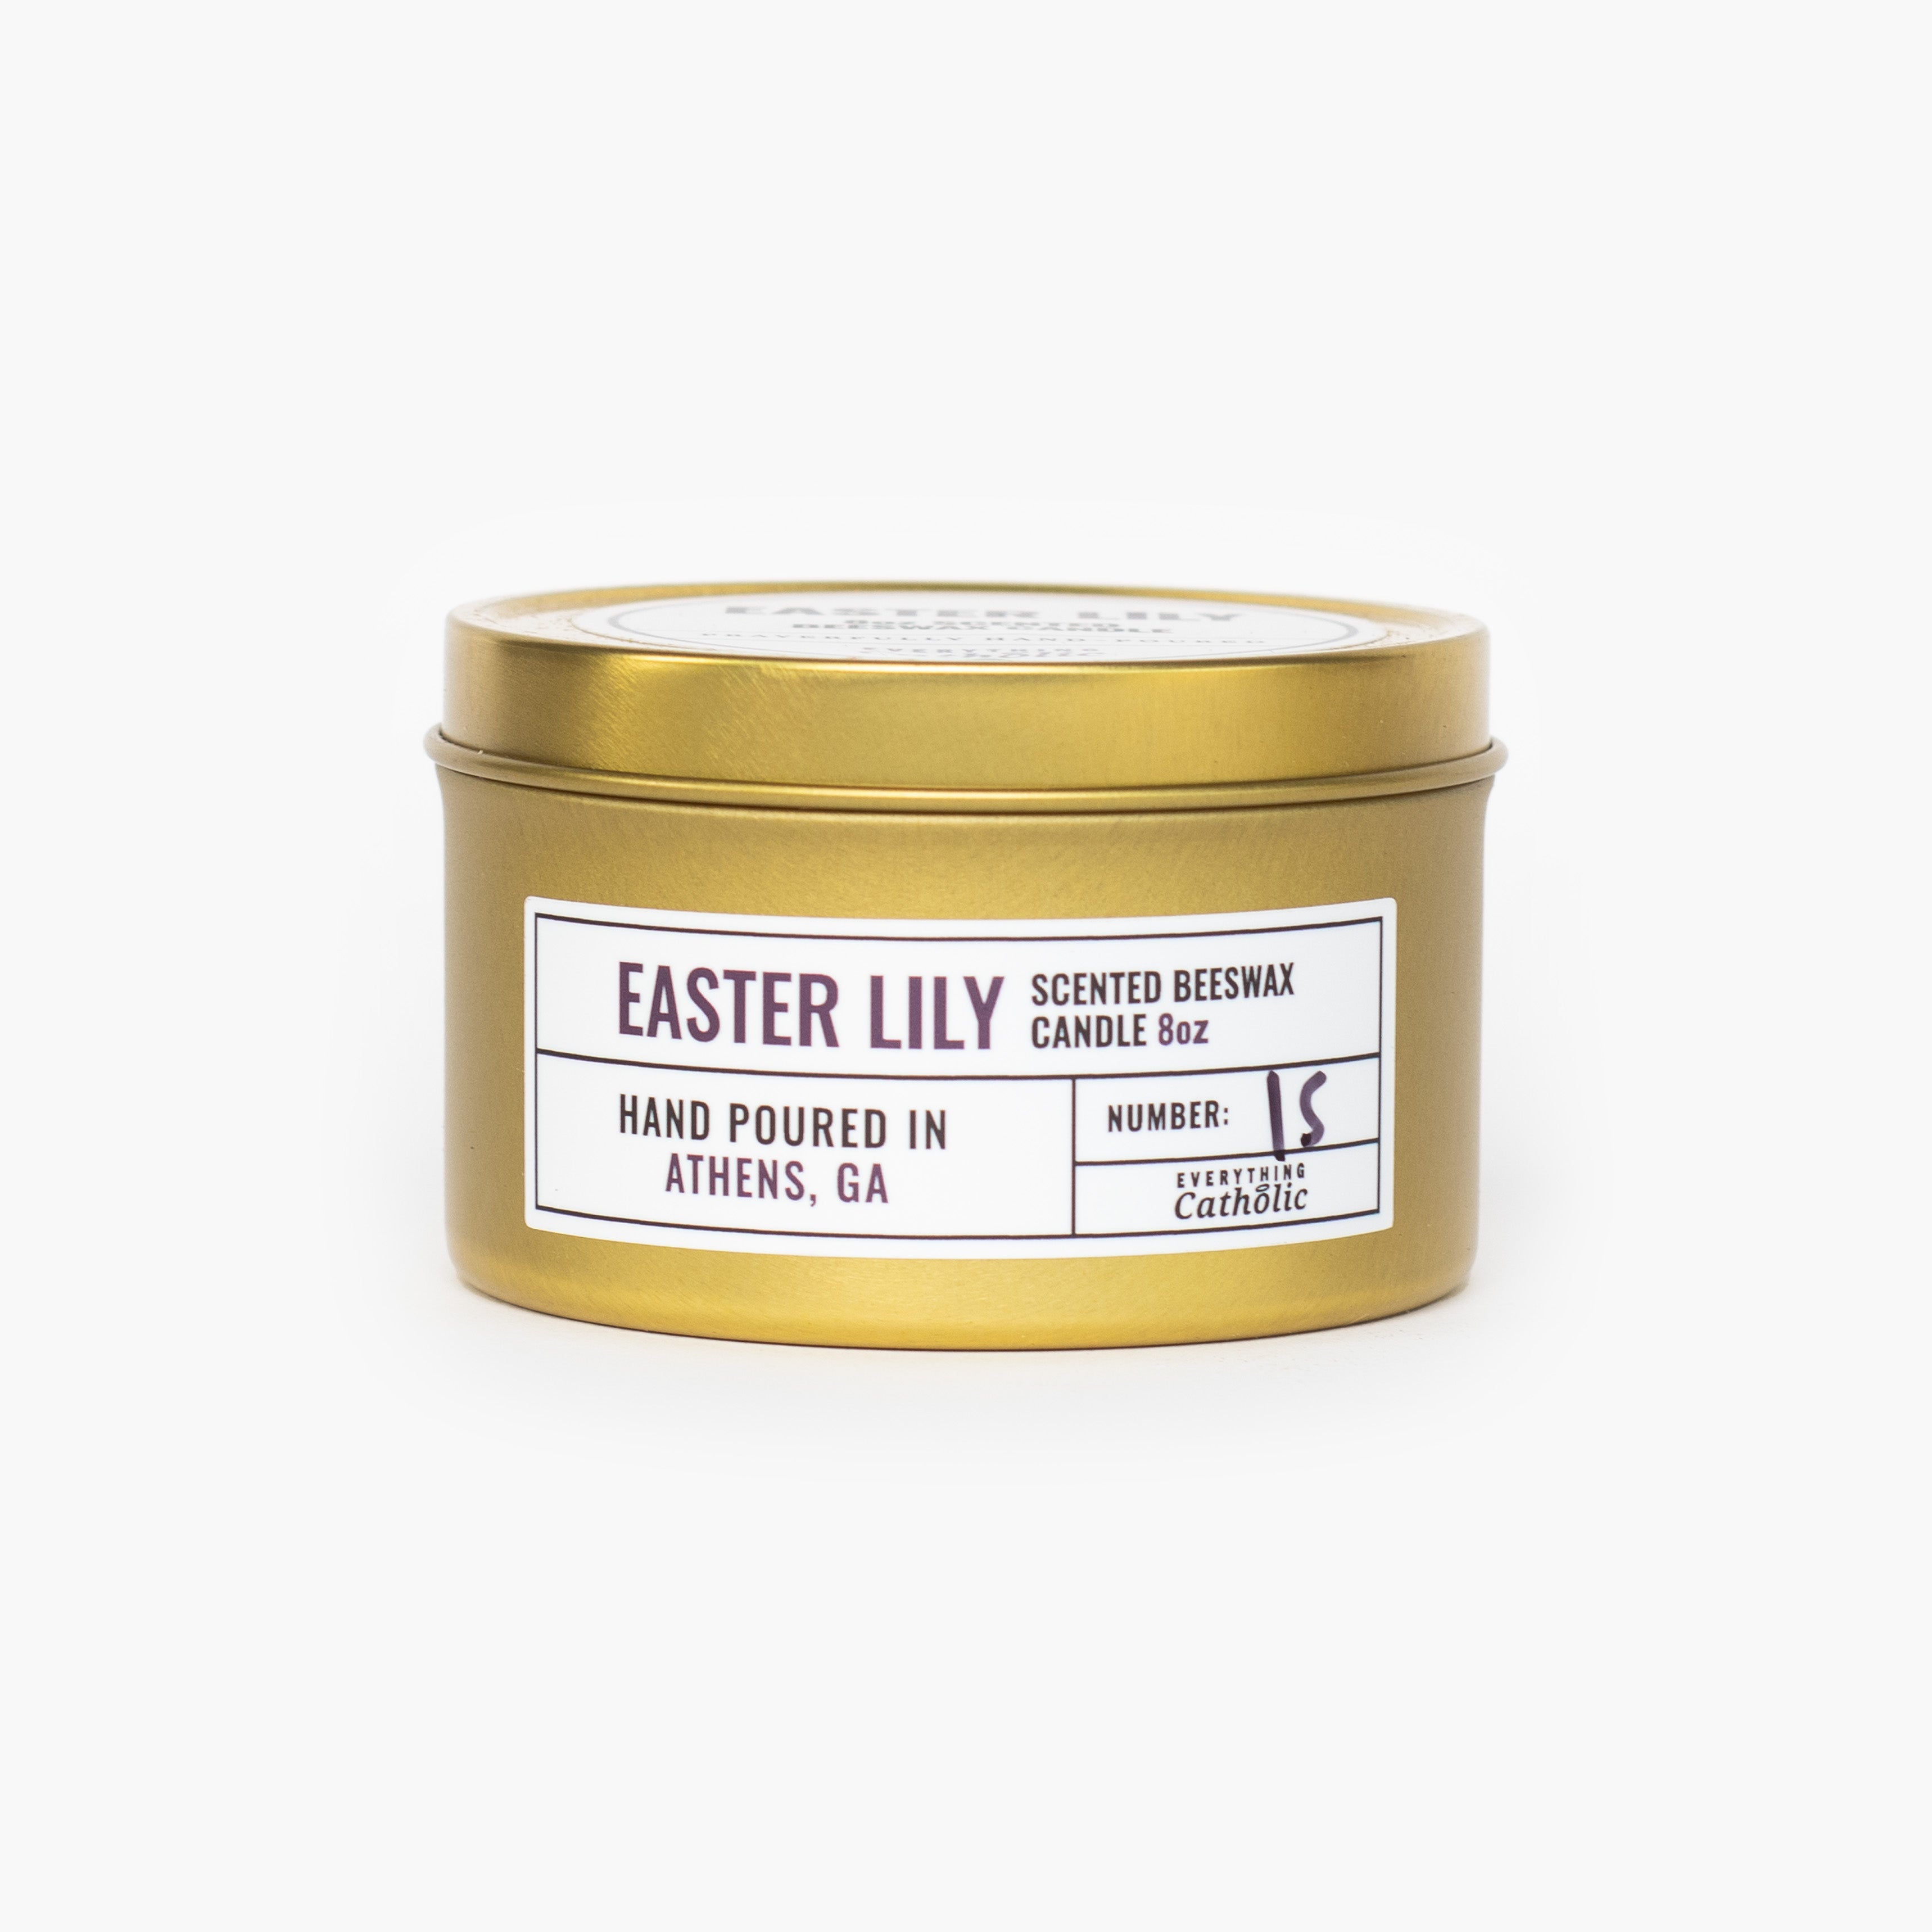 Easter Lily Beeswax Candle